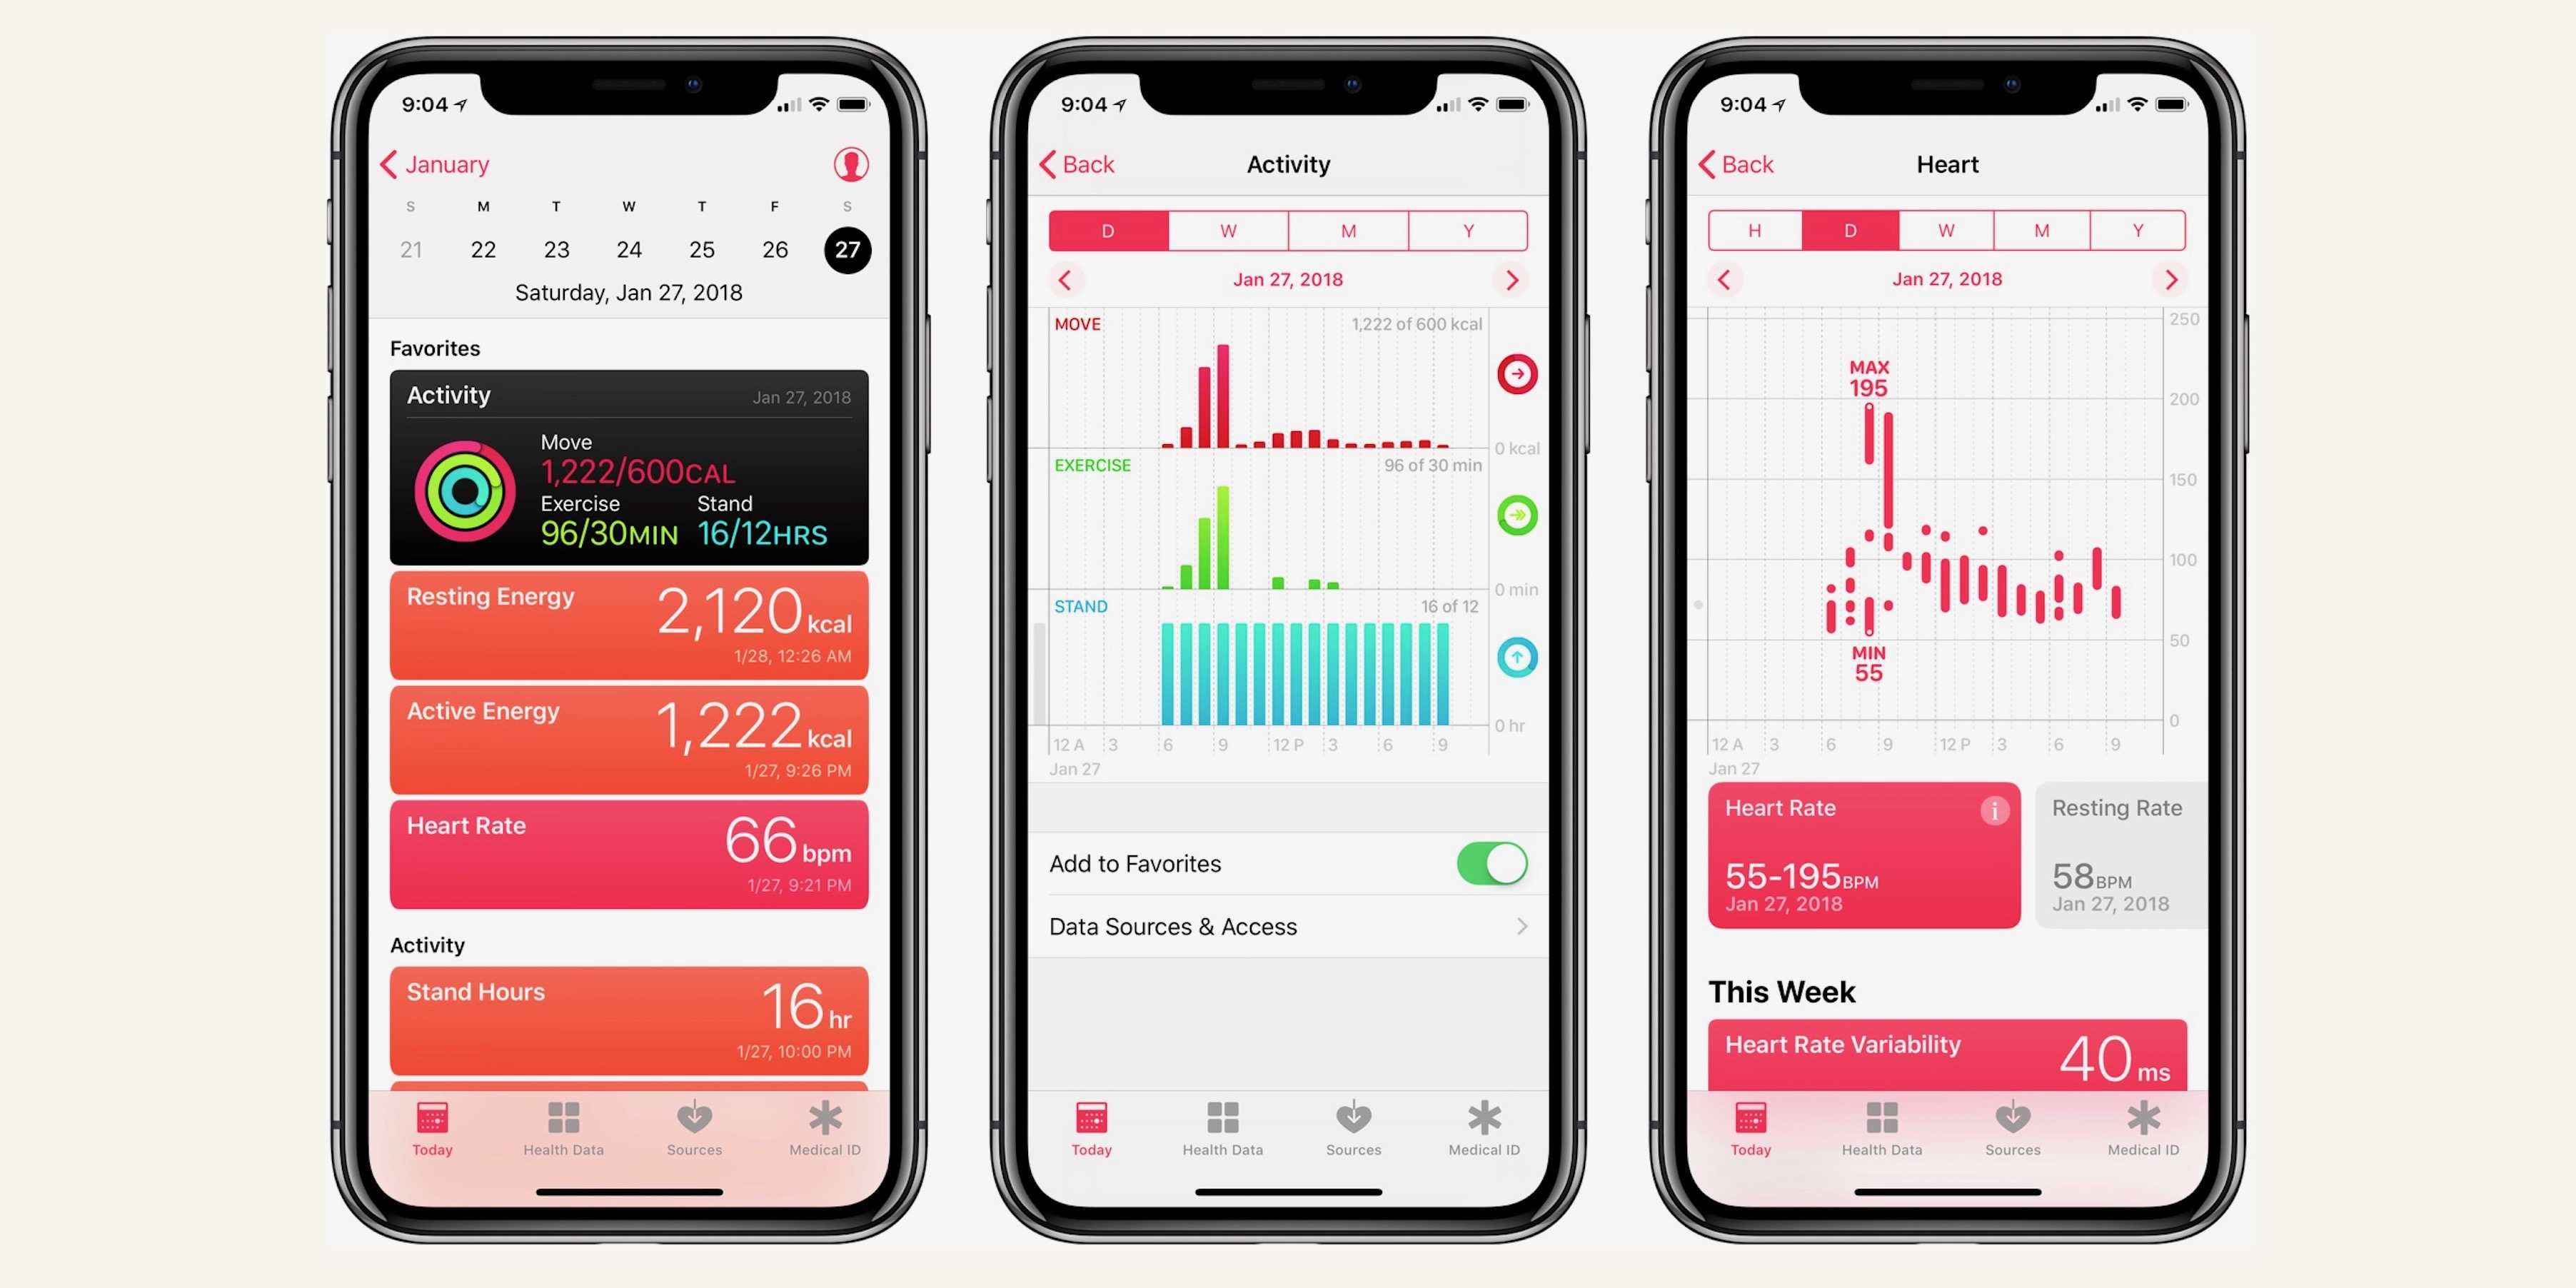 Opinion: Nokia hasn't been healthy for Withings, Apple should consider  HealthKit hardware - 9to5Mac